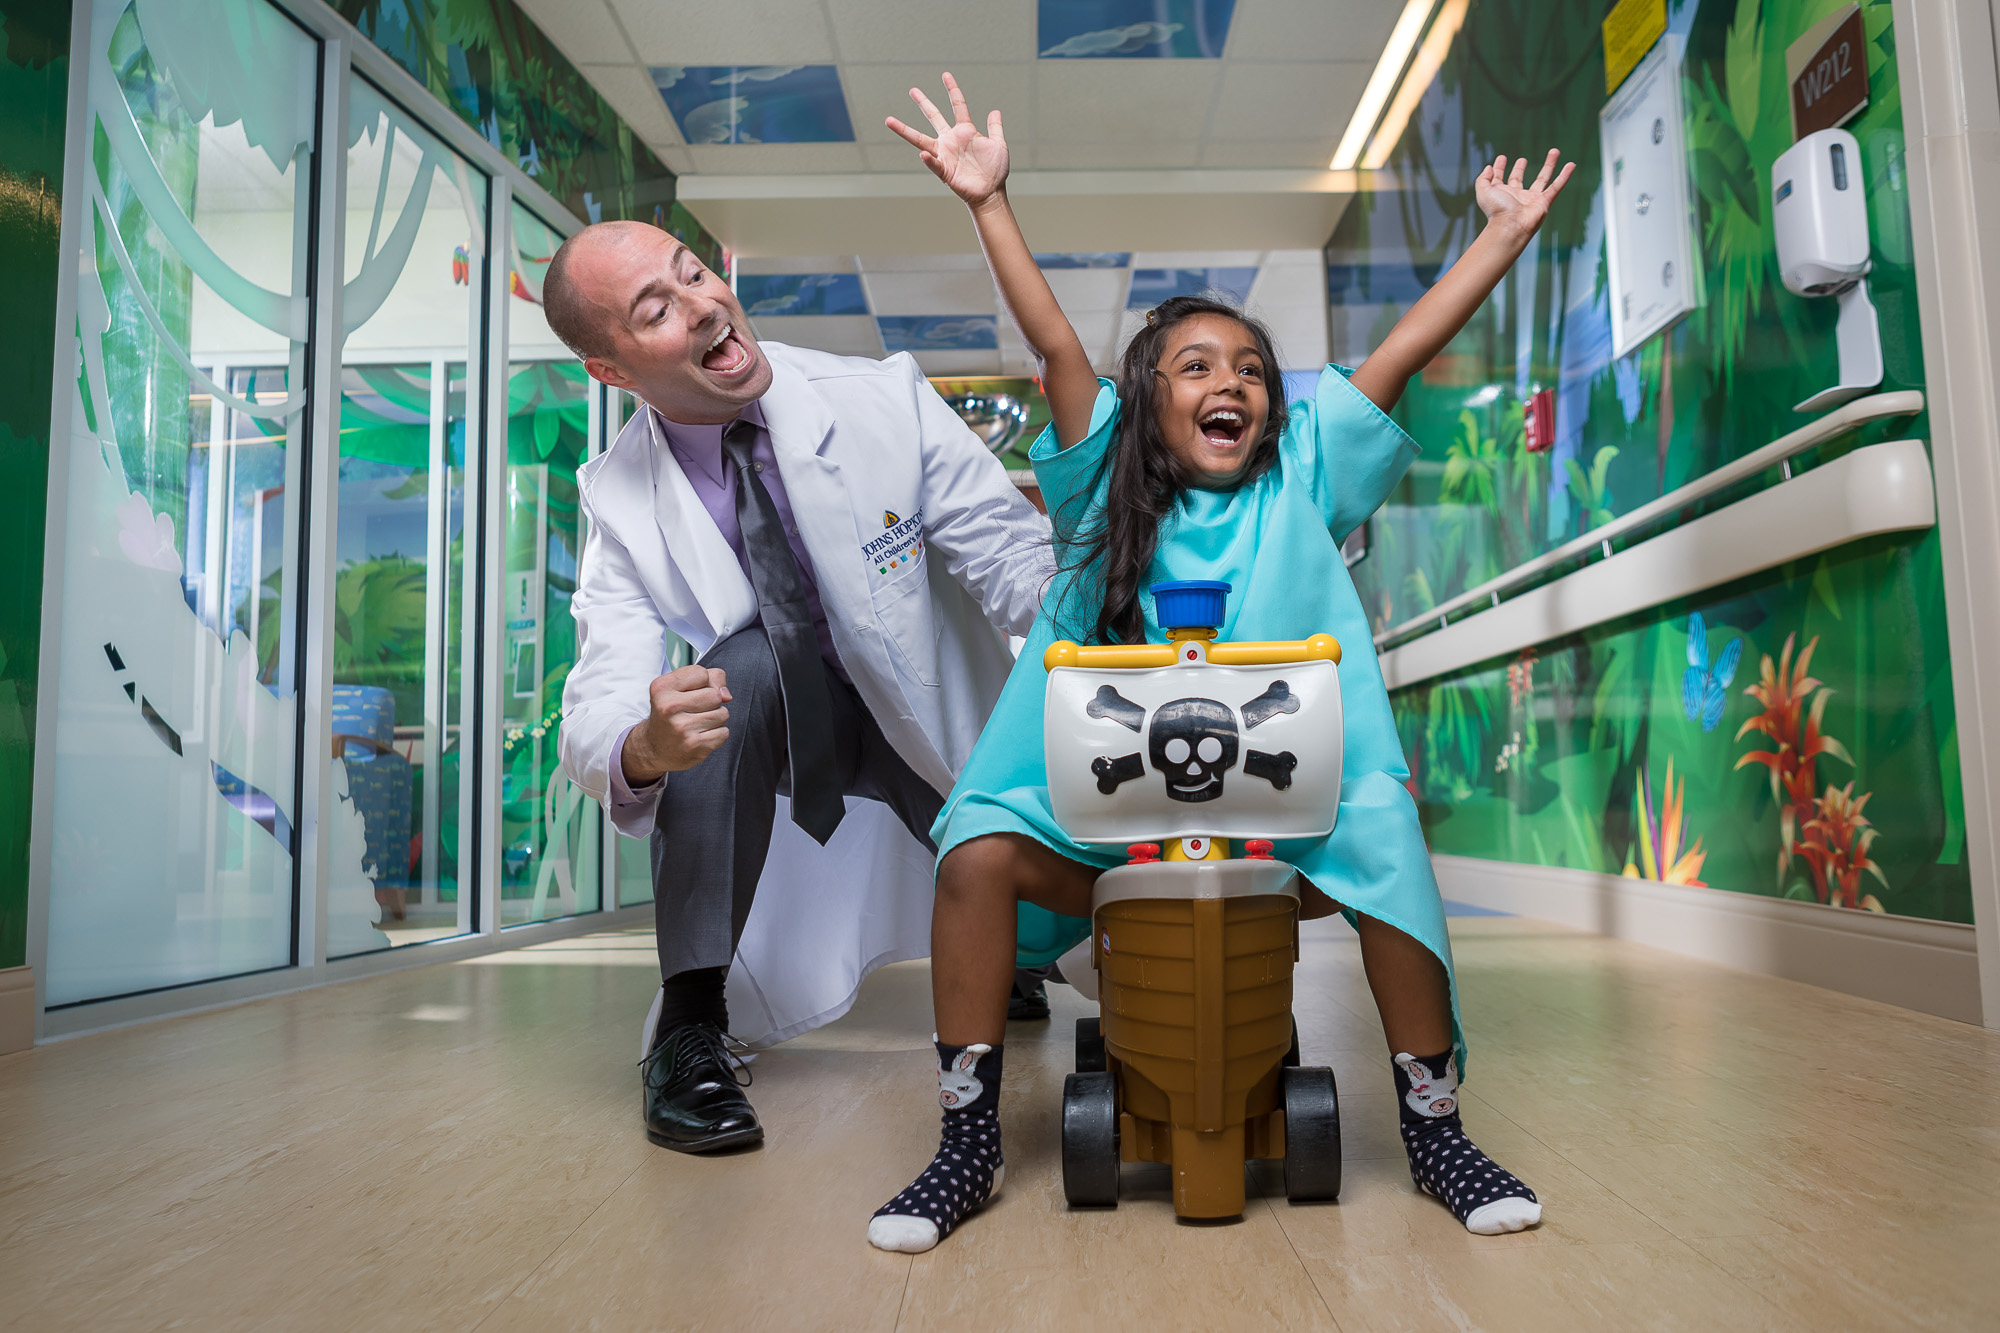 Doctor and patient playing in hospital hallway